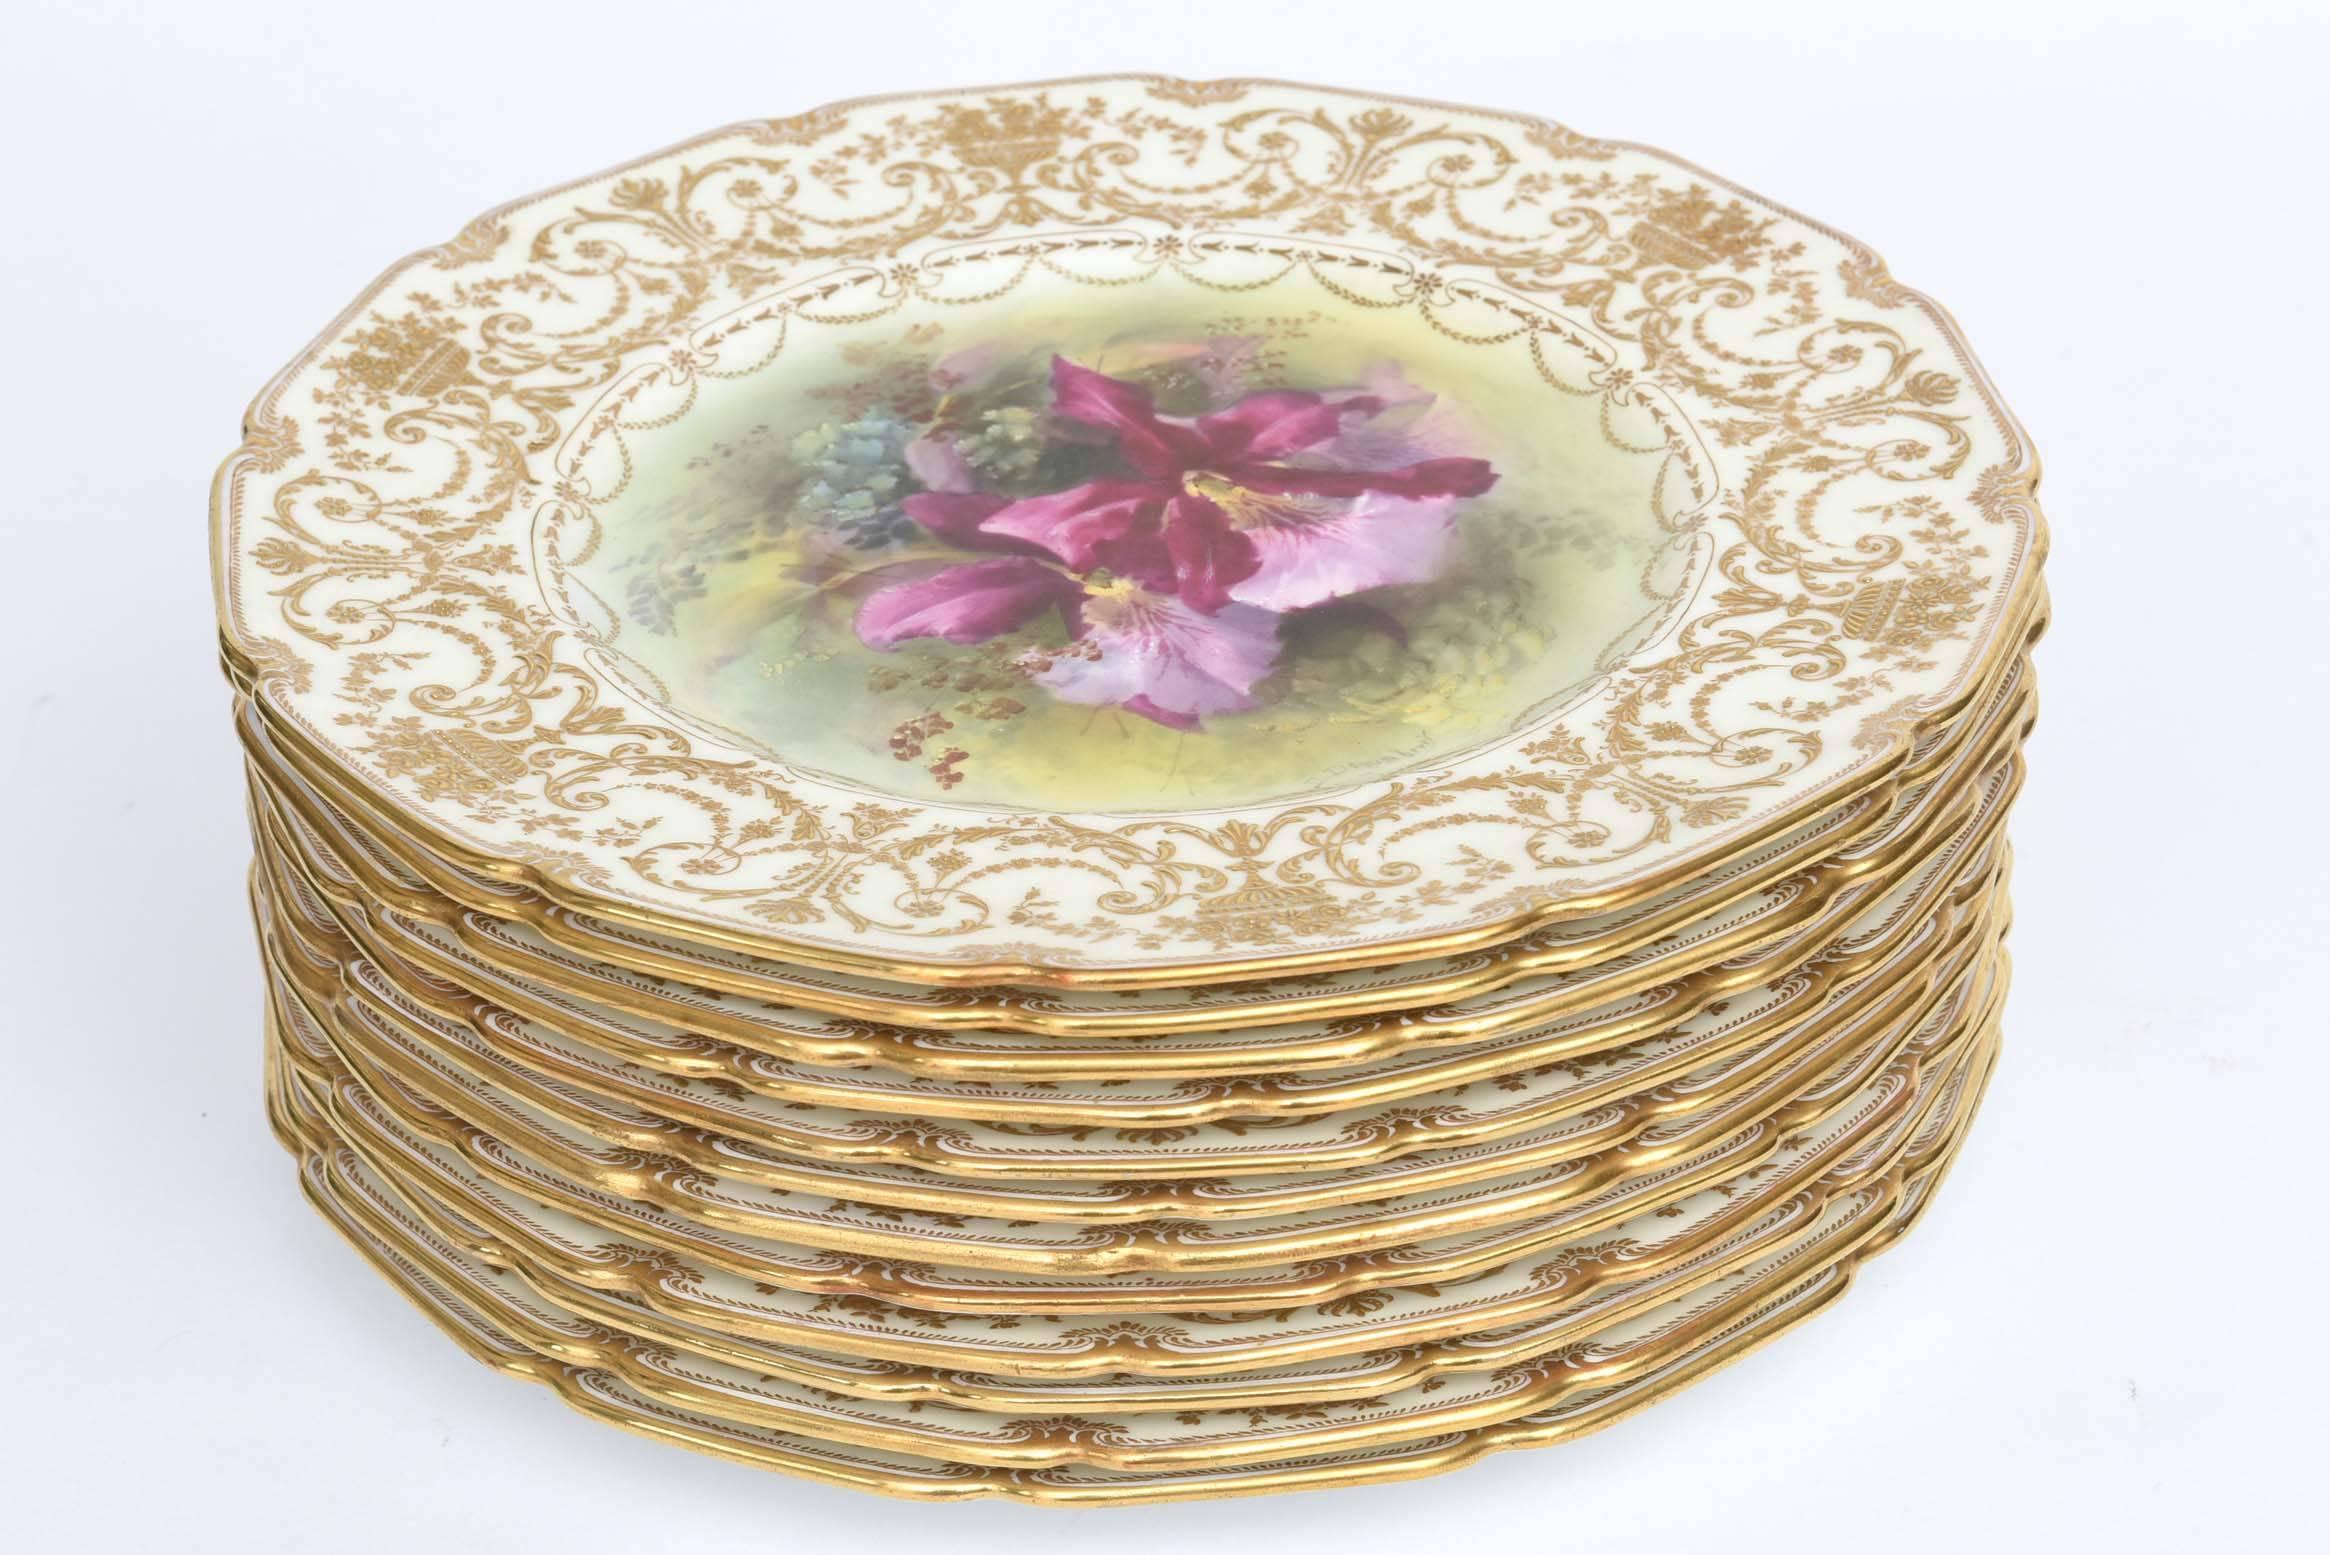 One of the prettiest sets of Antique English plates custom, from Royal Doulton. These feature their Classic shaped edge, raised gilding on the shoulders and exquisitely hand-painted by and ordered through the fine gilded age retailer of.
Artist